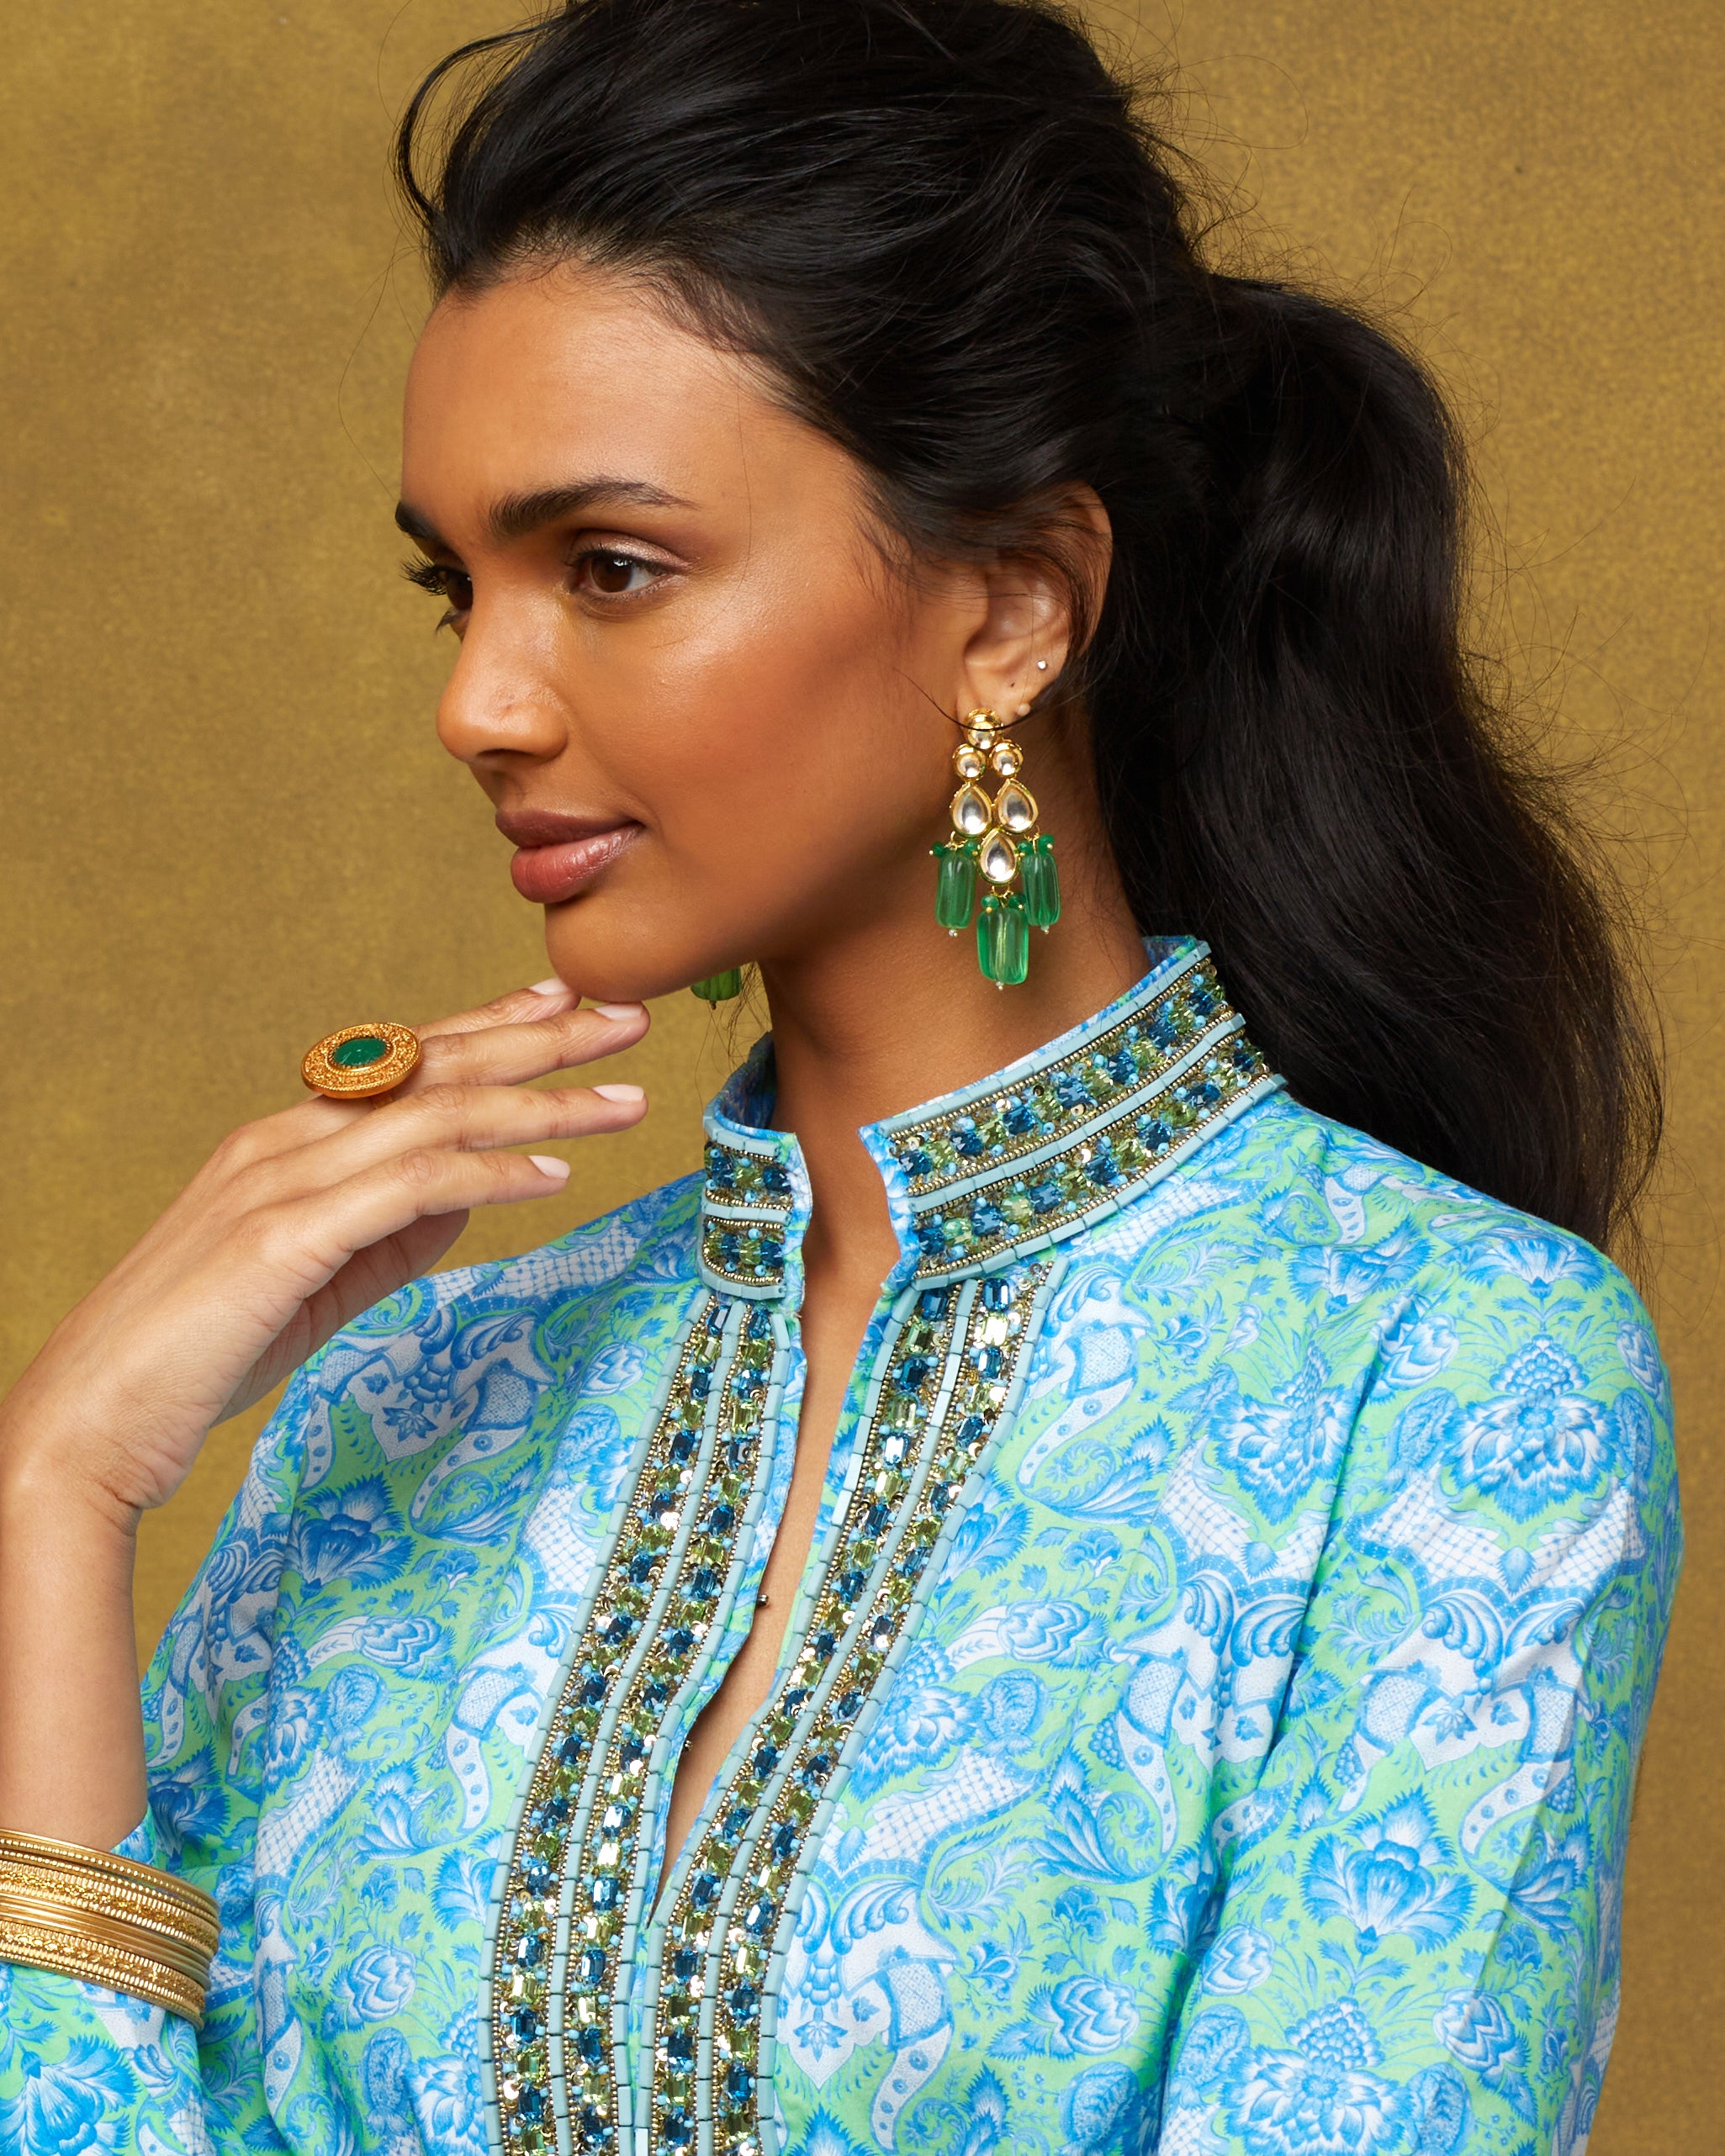 Shalimar Tunic in Turquoise and Green and Topaz Crystal Embellishment